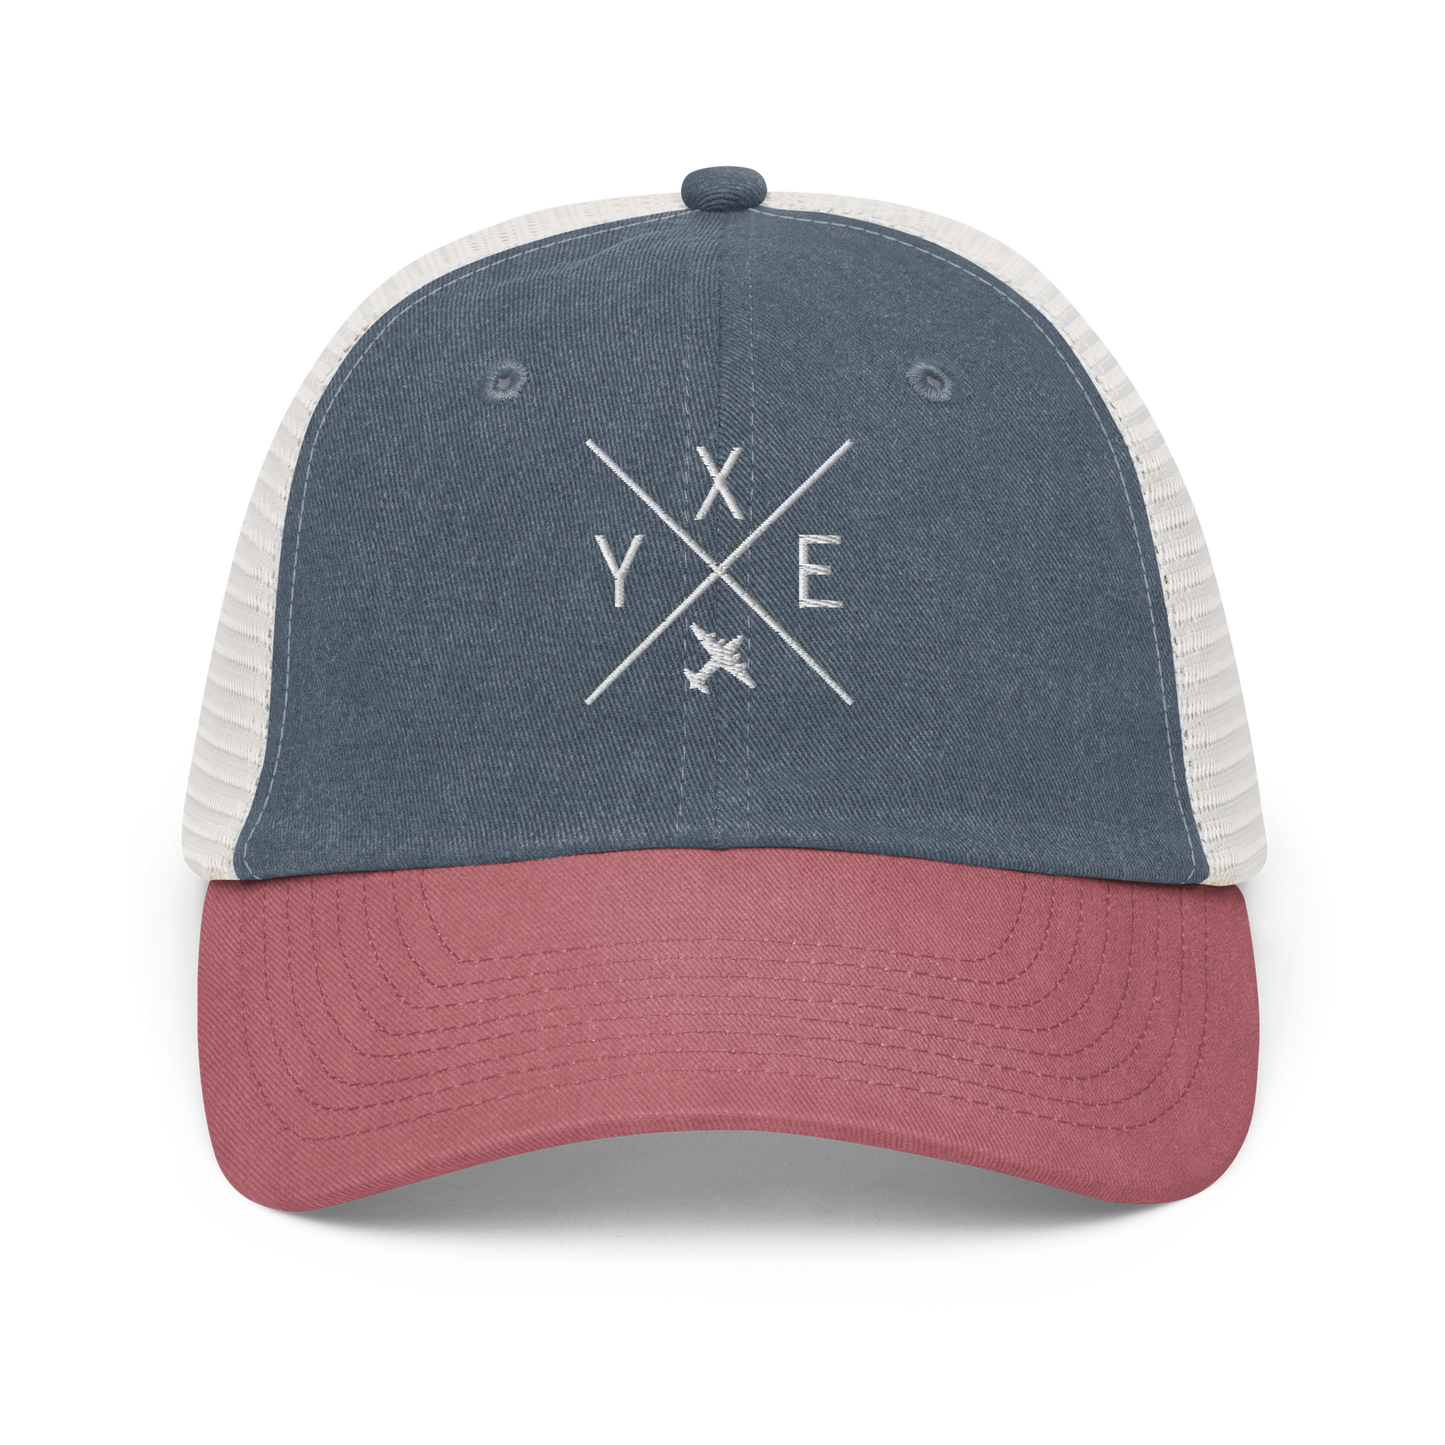 YHM Designs - YXE Saskatoon Pigment-Dyed Trucker Cap - Crossed-X Design with Airport Code and Vintage Propliner - White Embroidery - Image 12